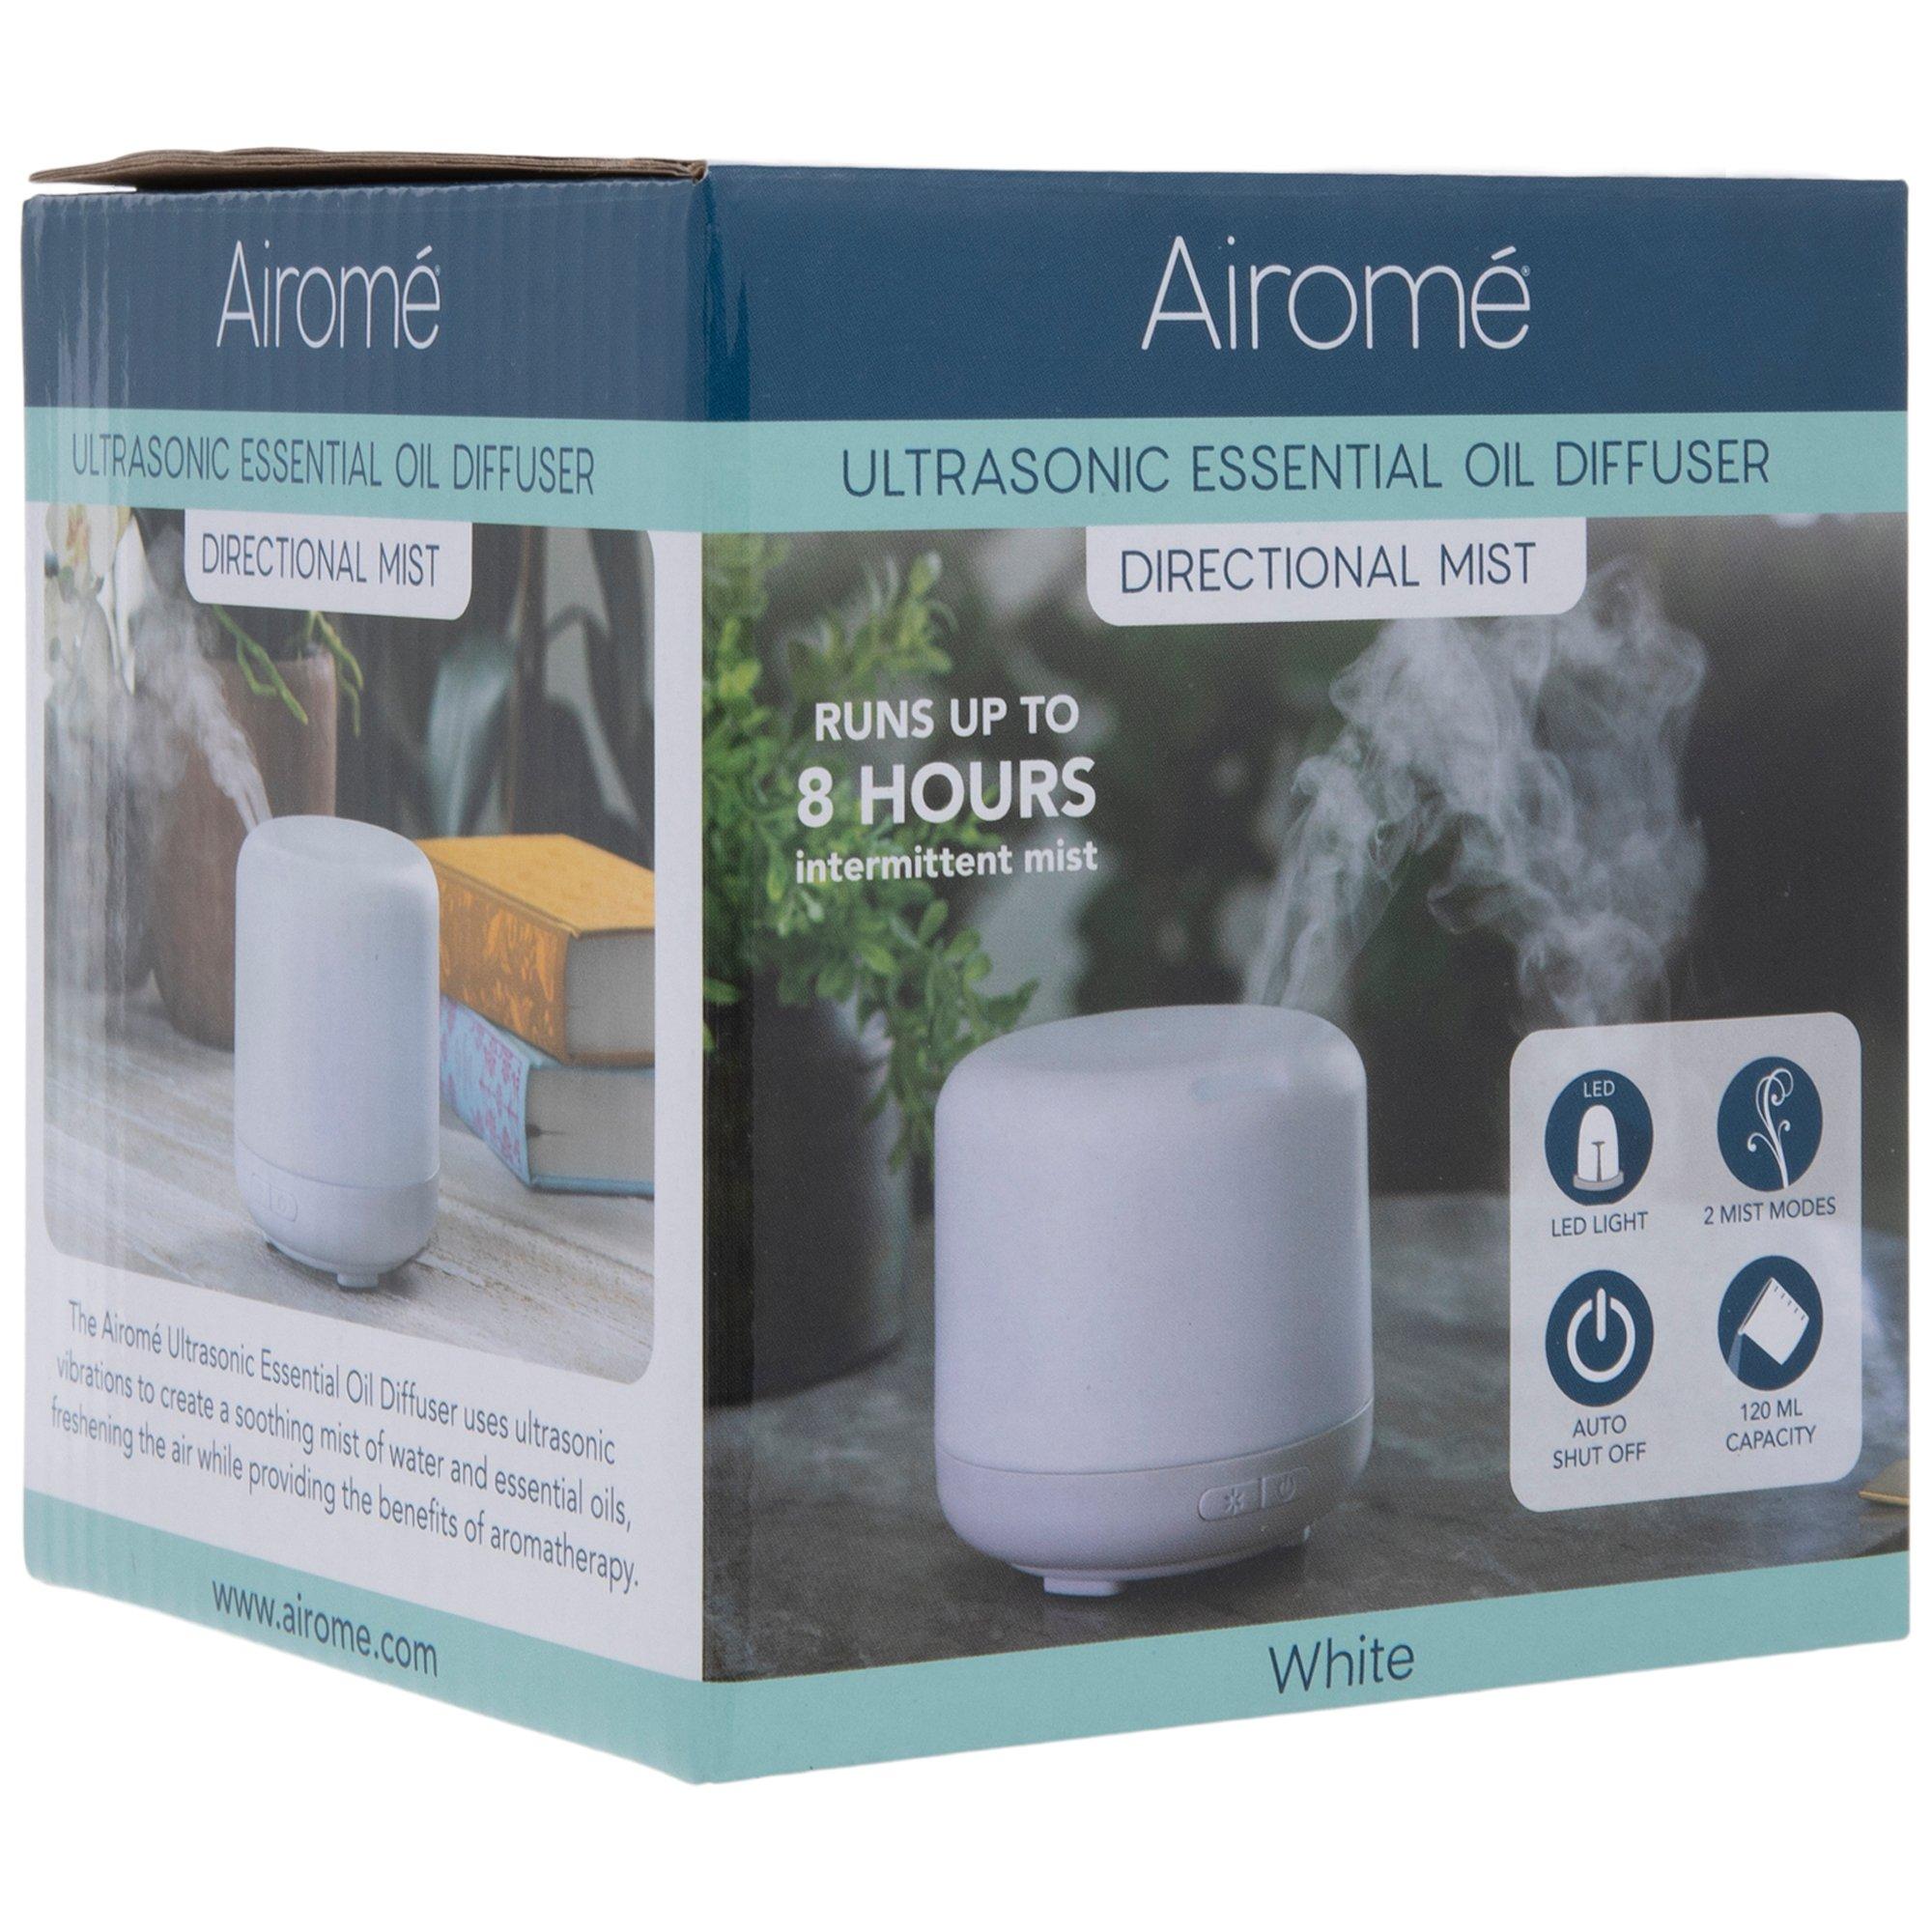 Ultrasonic Essential Oil Diffuser with Essential Oils